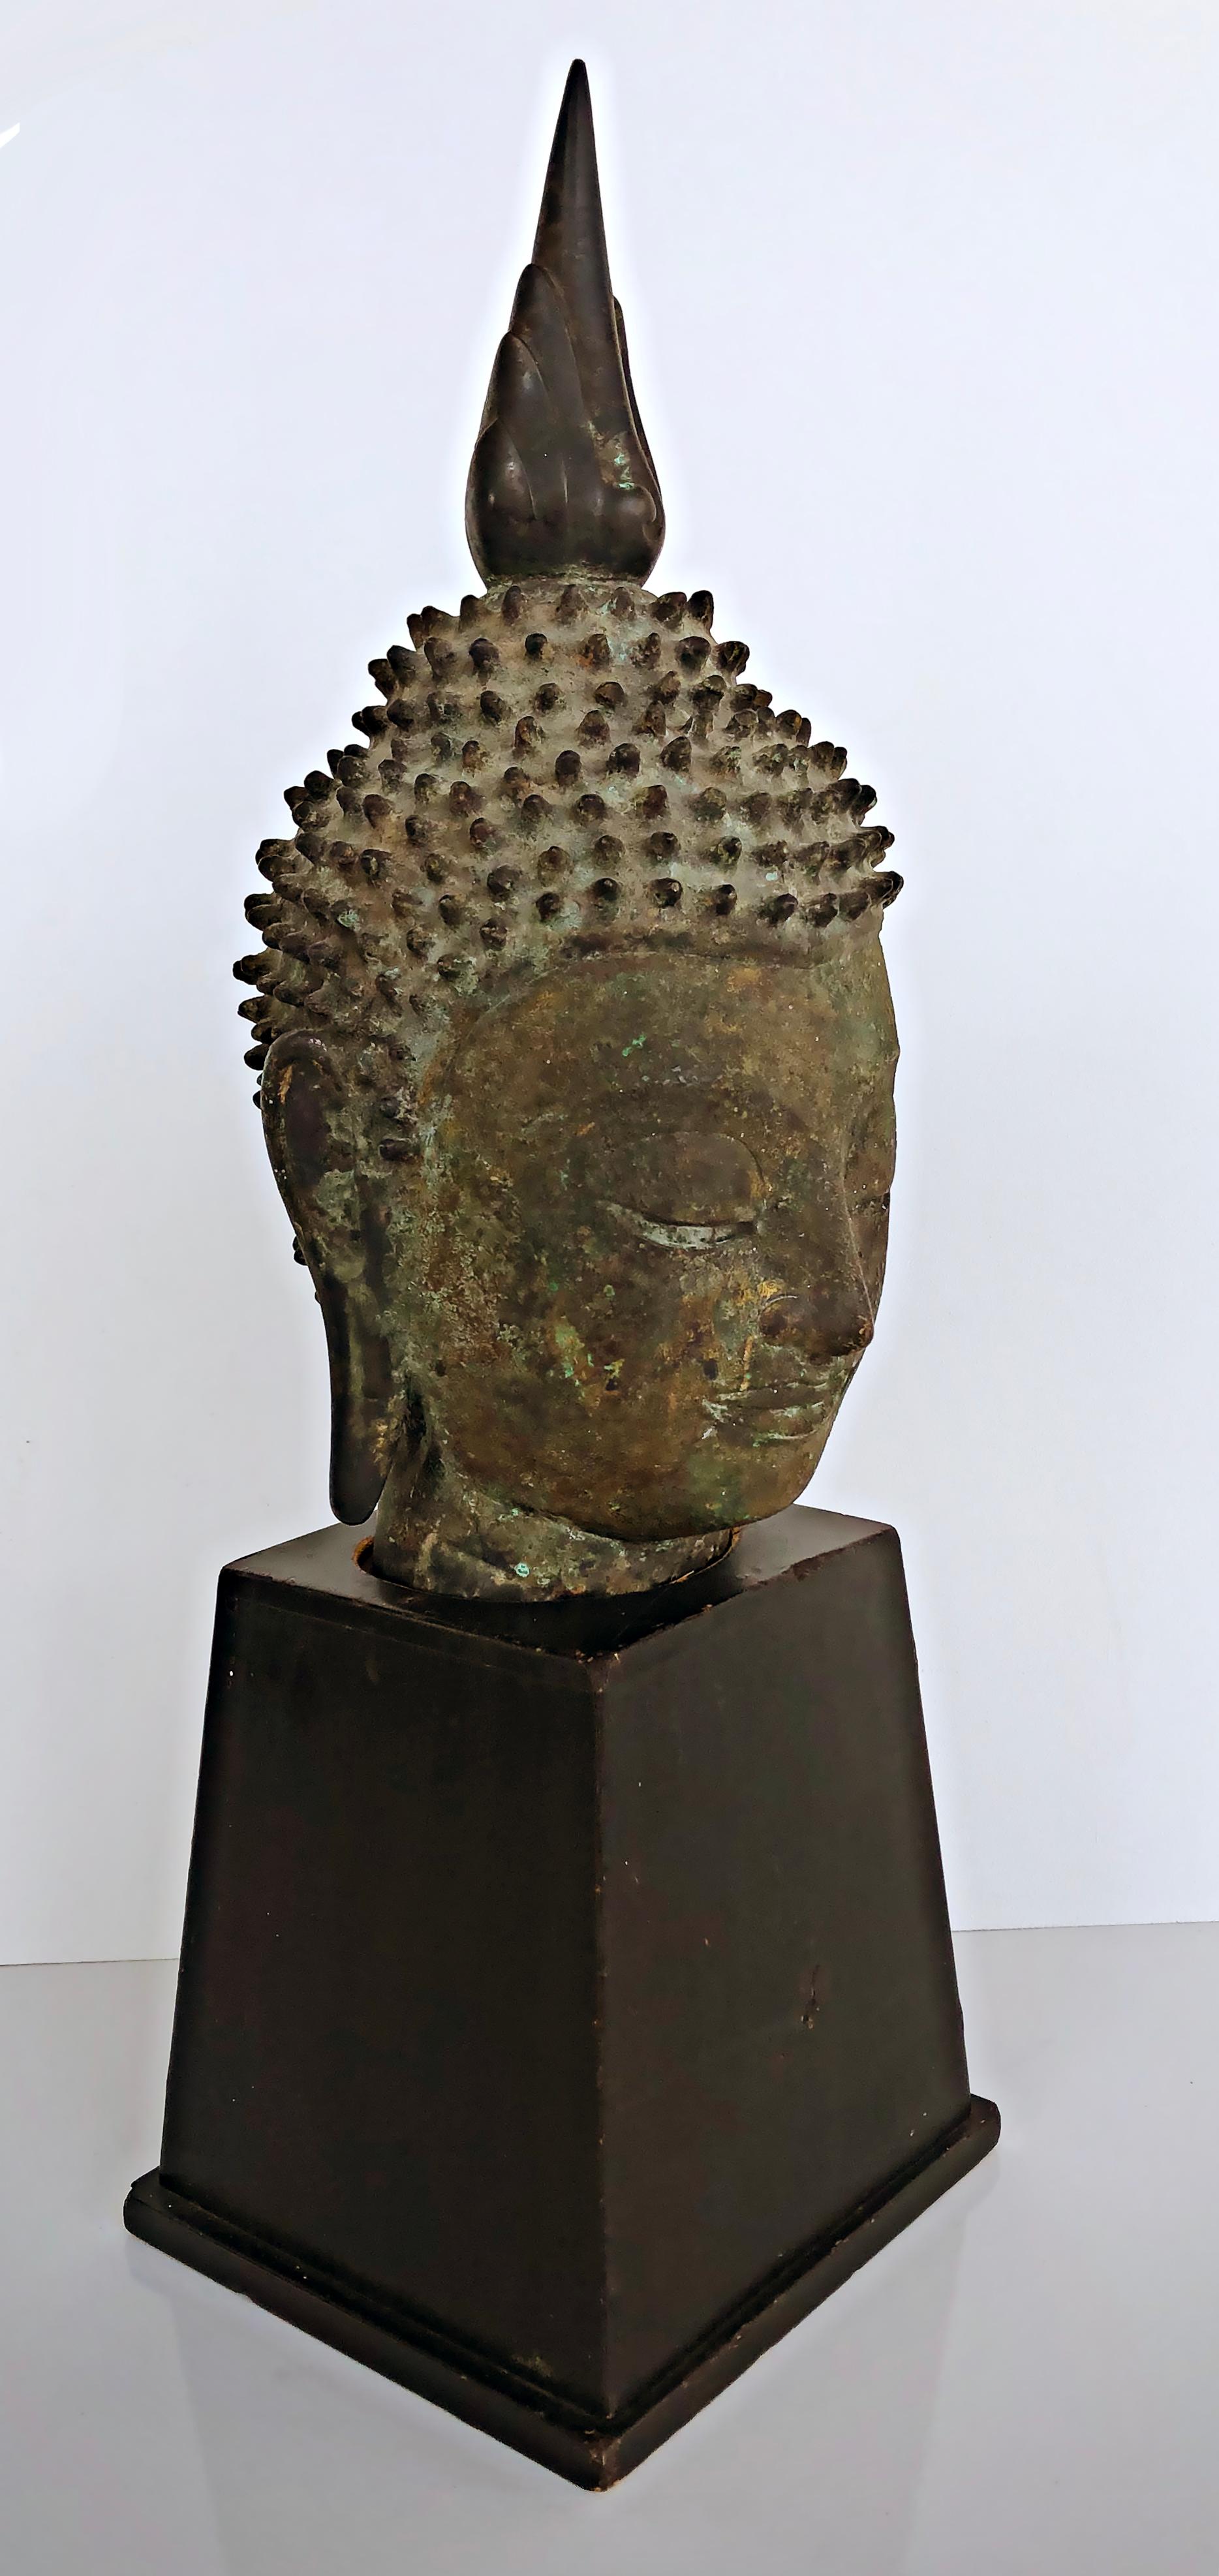 Vintage Thailand bronze Buddha sculpture on plinth, dark green patina

Offered for sale is a vintage Thai bronze buddha sculpture of a bust raised on a plinth. The bronze had a green, weathered patina.